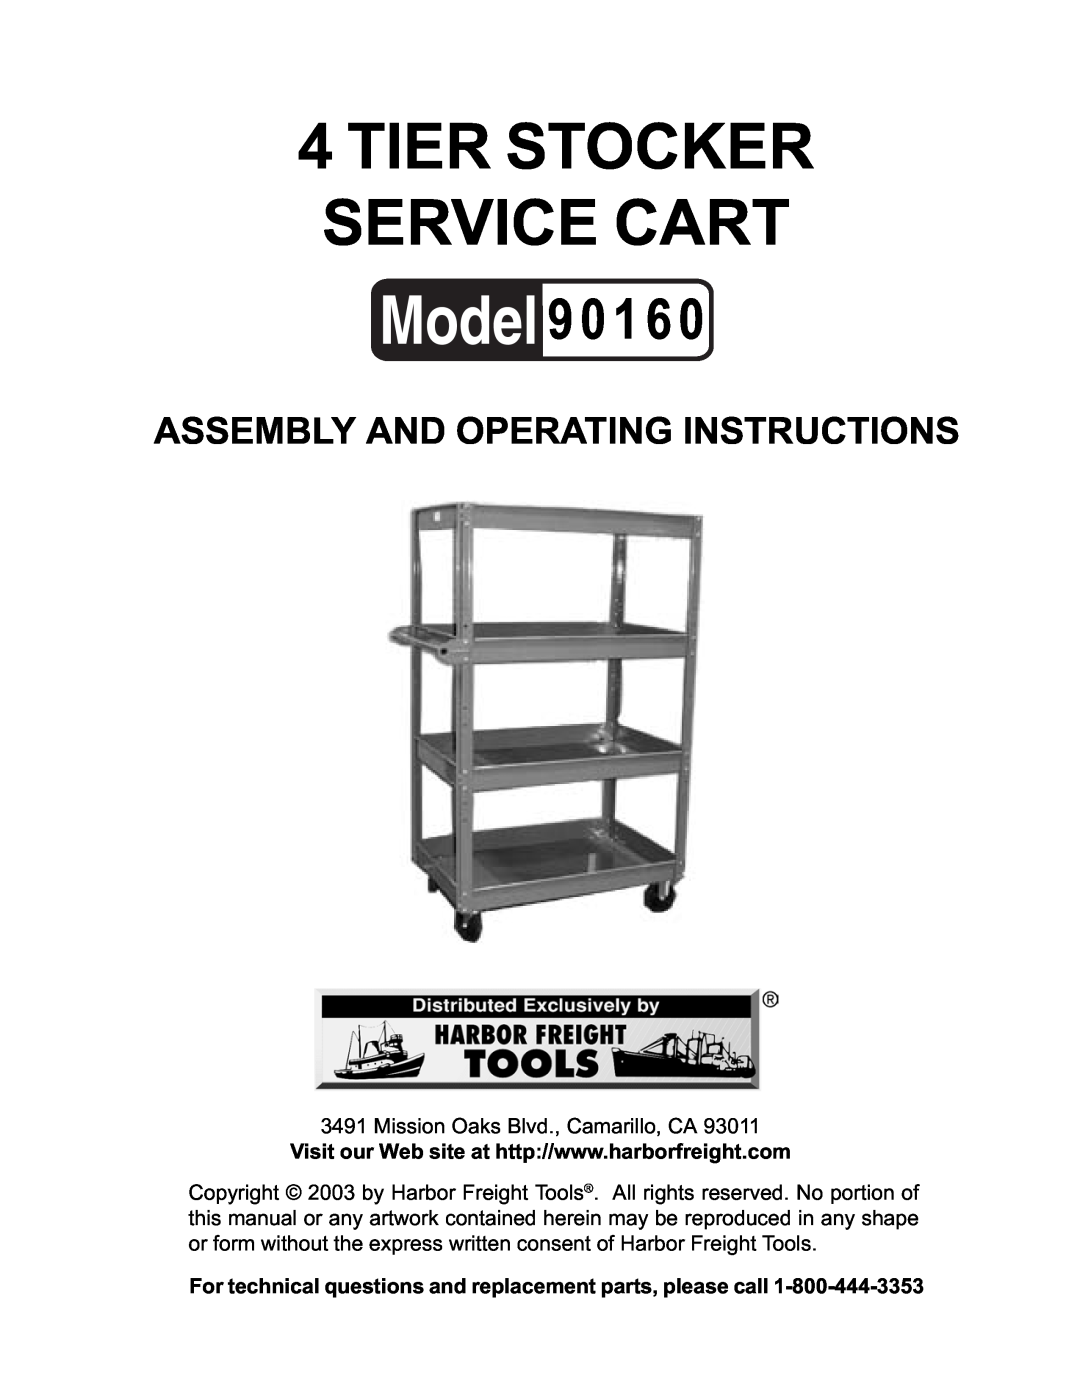 Harbor Freight Tools 90160 operating instructions Tier Stocker Service Cart, 9 0 1 6, Assembly And Operating Instructions 